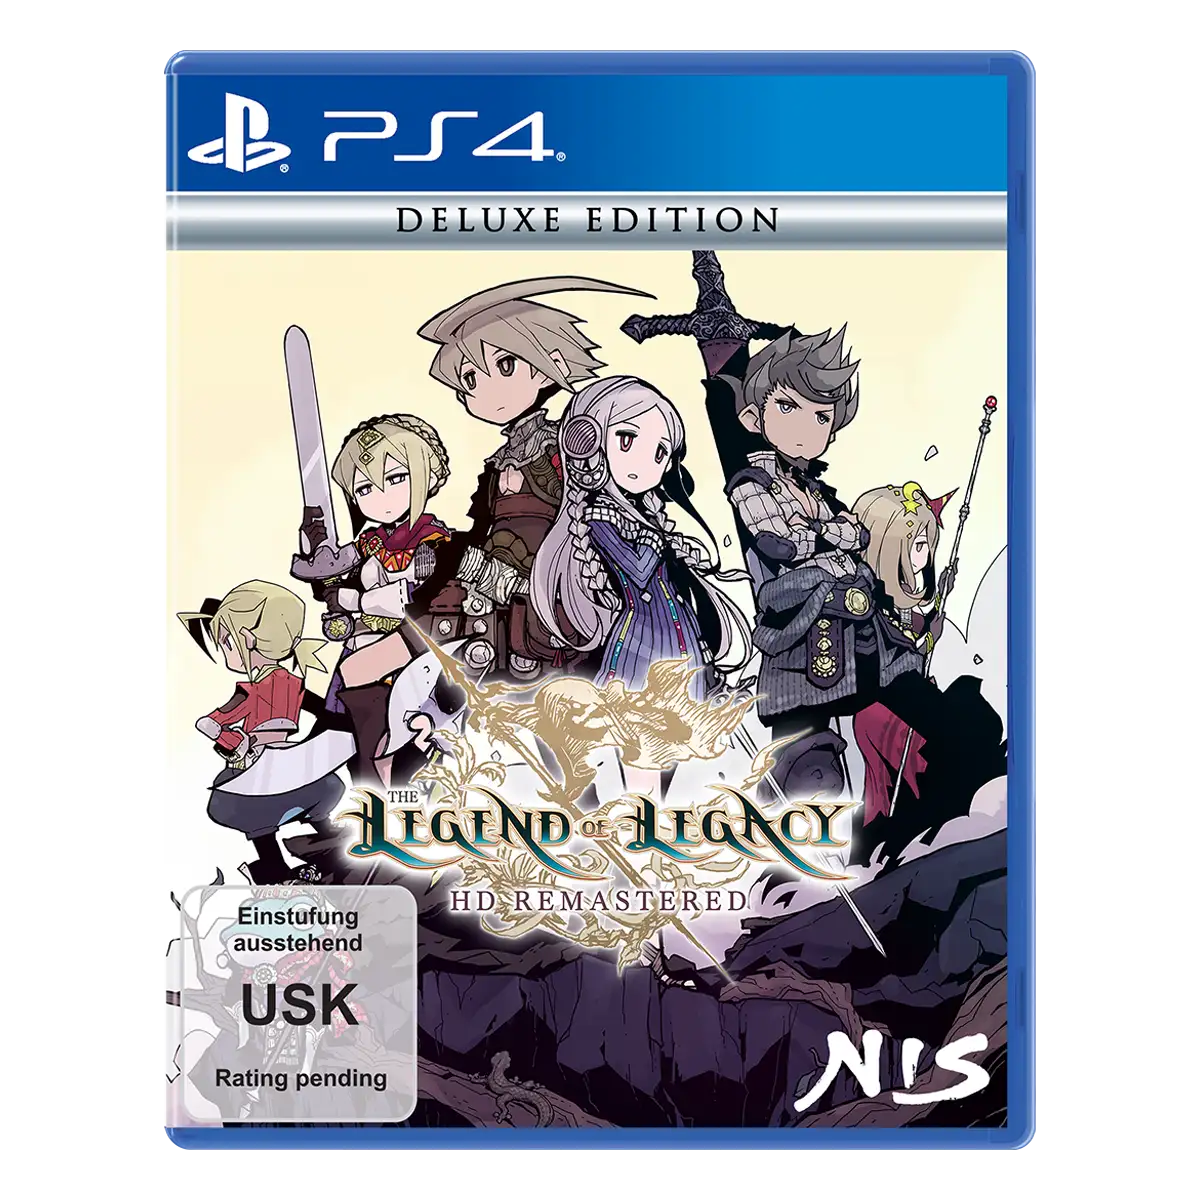 The Legend of Legacy HD Remastered - Deluxe Edition (PS4) Cover